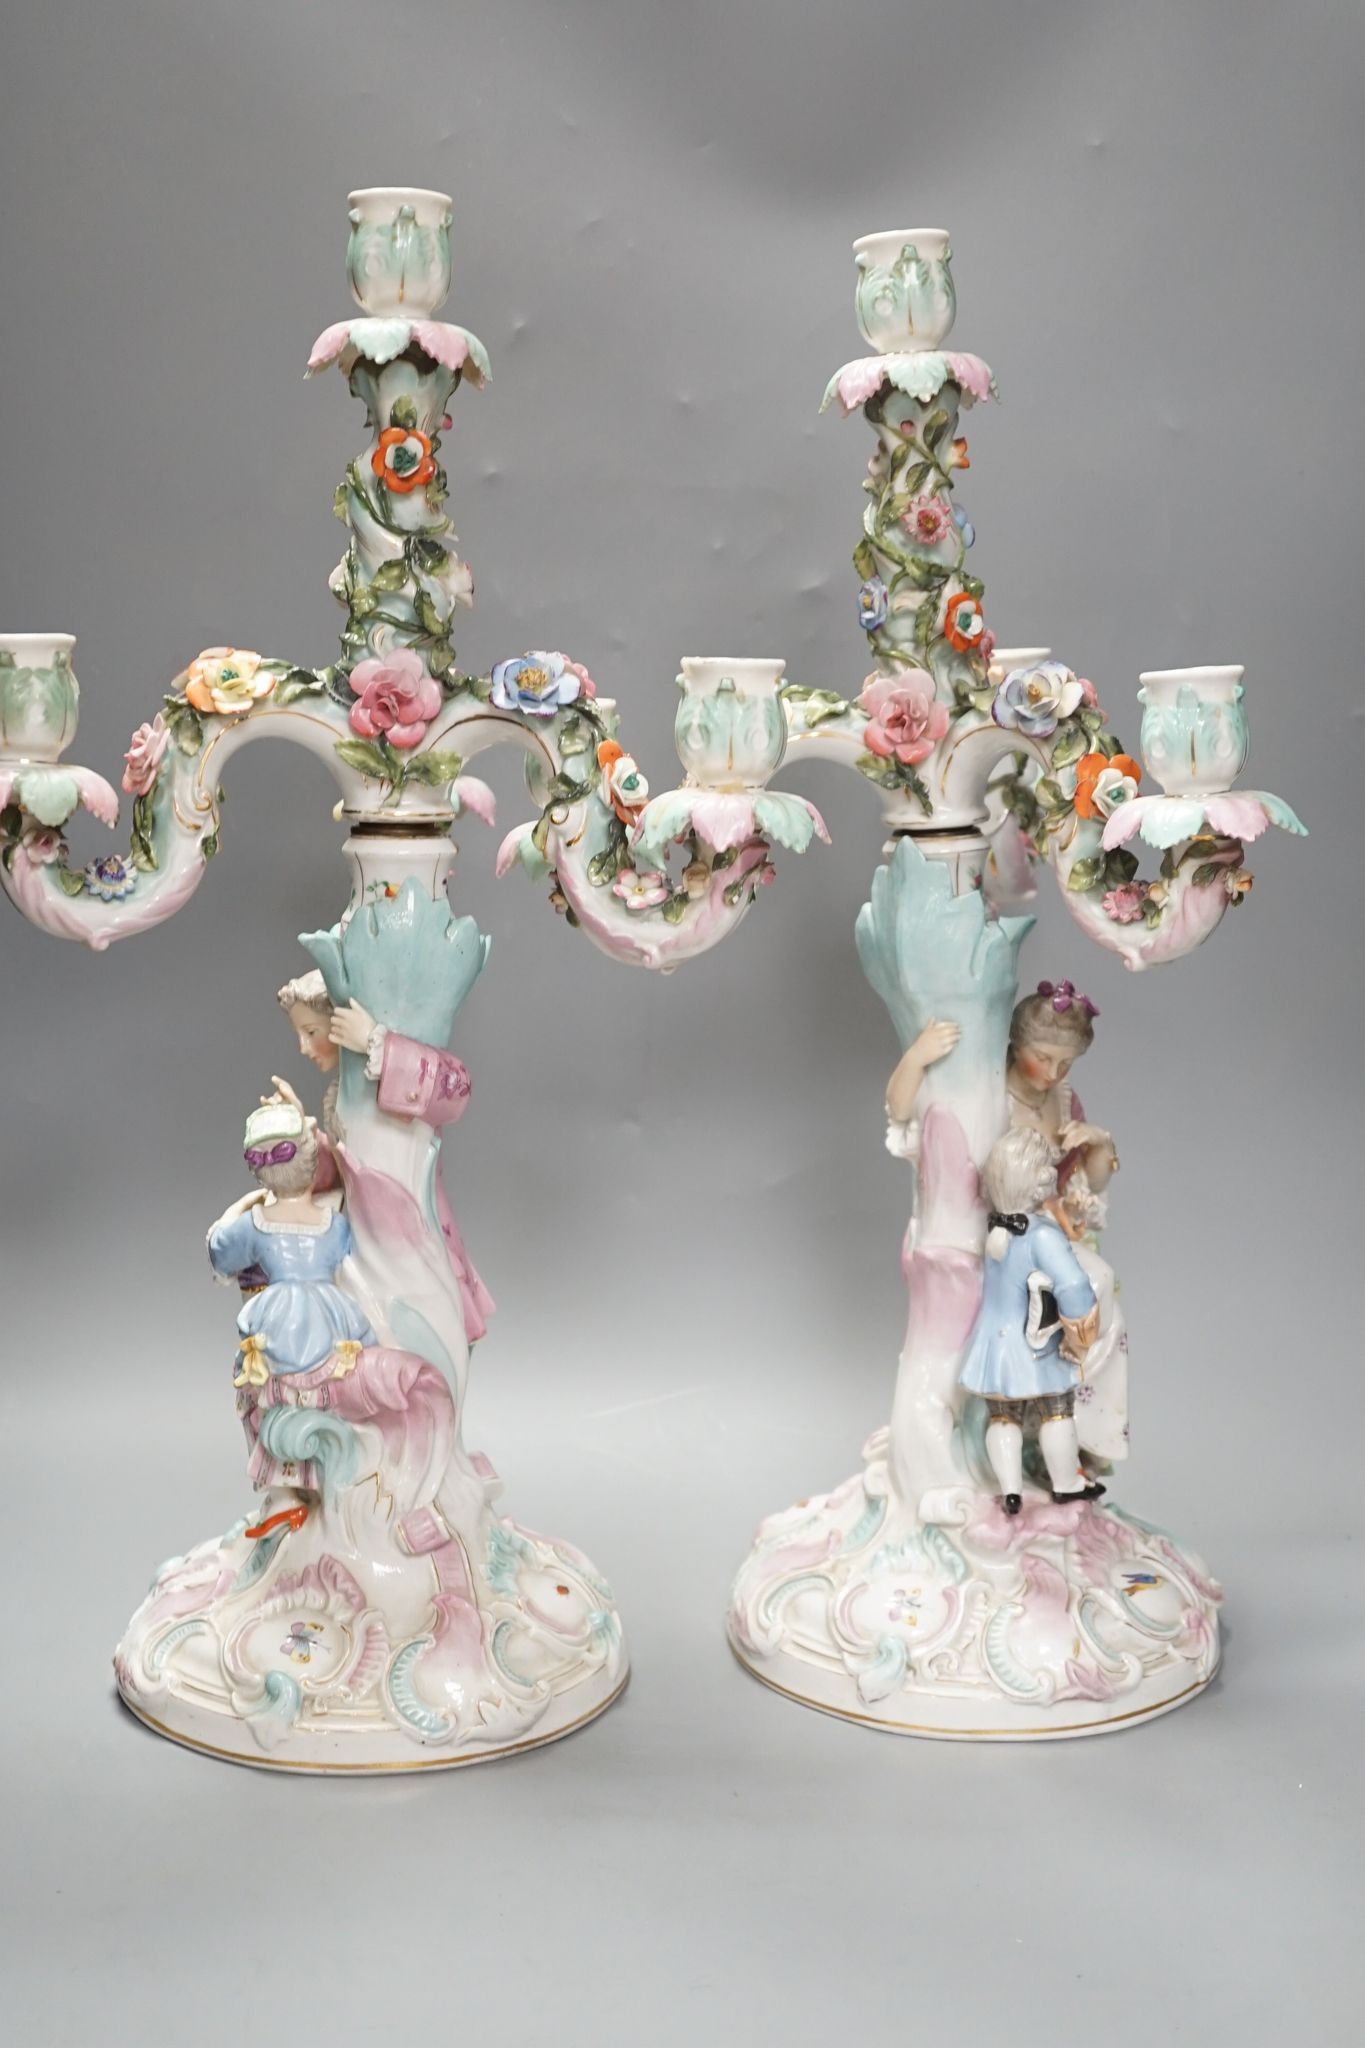 A pair of late 19th century German floral encrusted, figurative porcelain candelabra, 52 cms high.